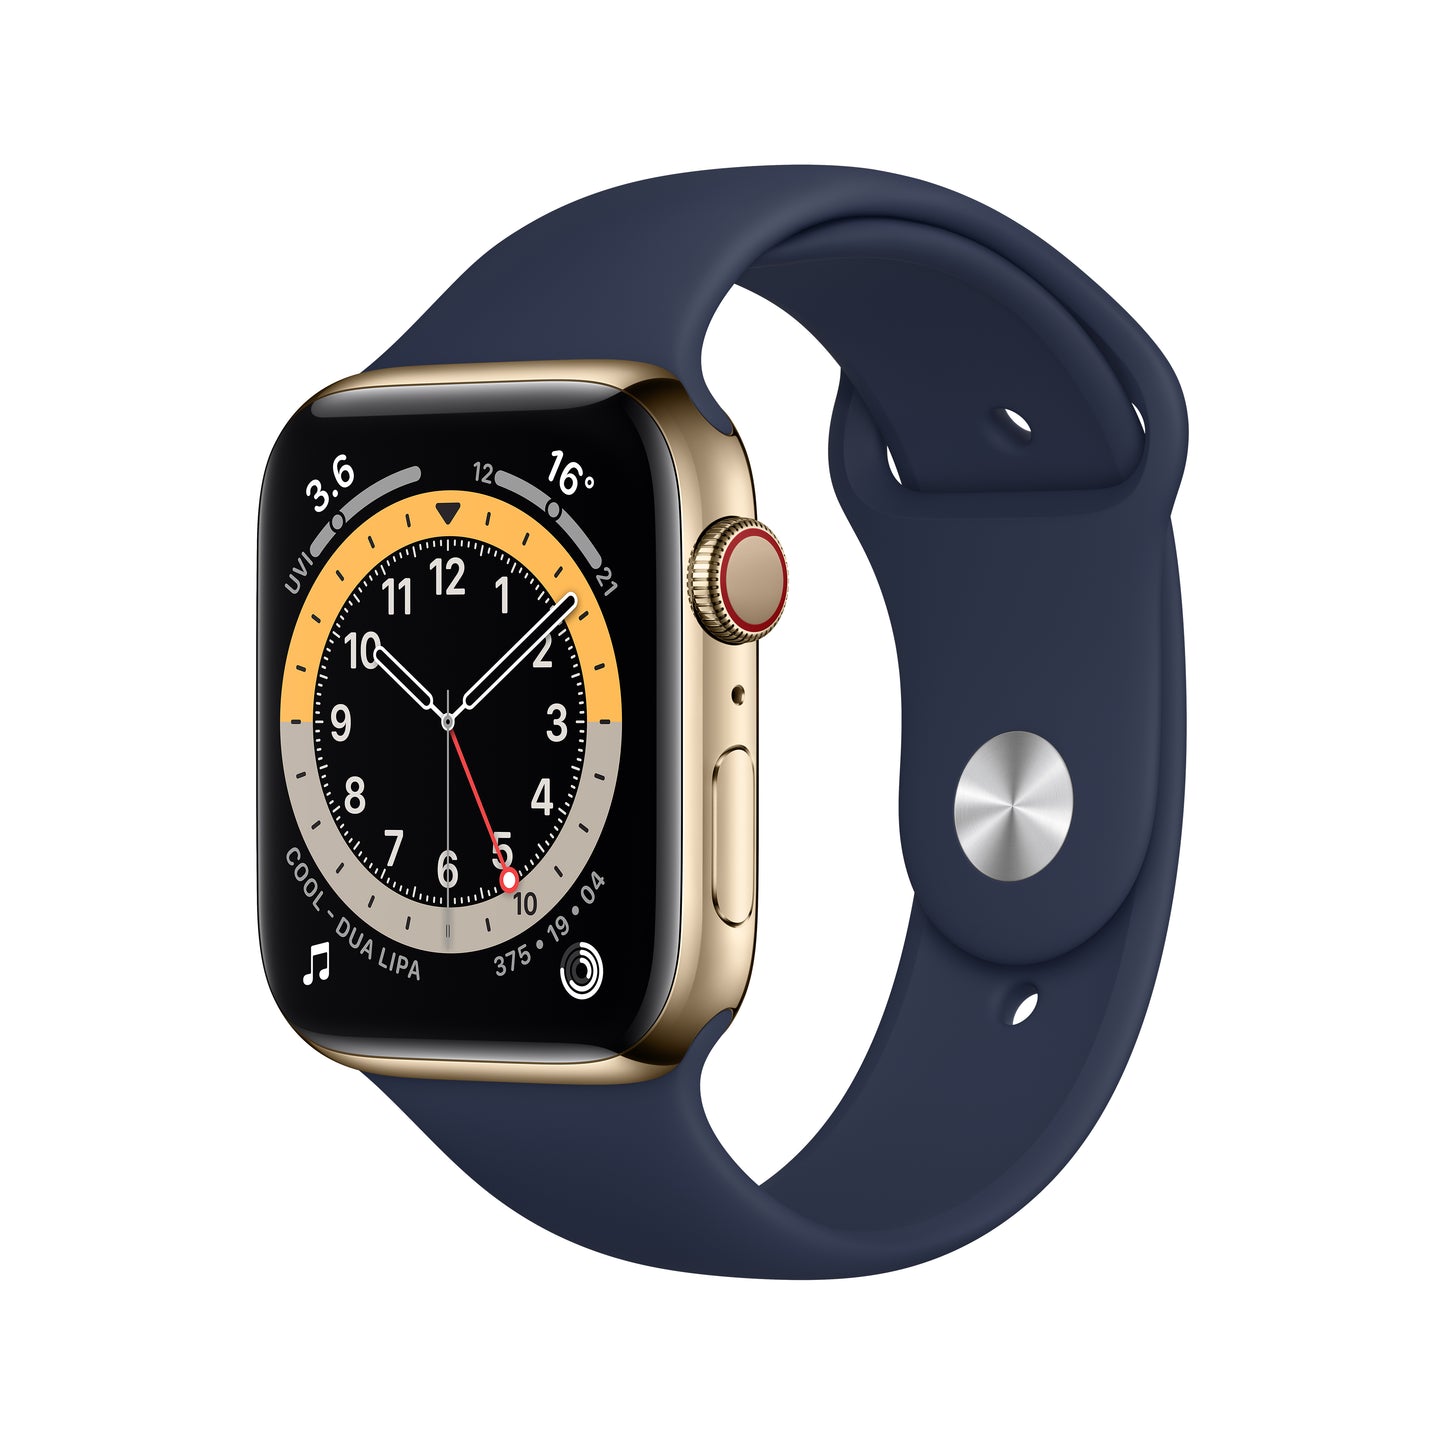 Apple Watch Series 6 Cellular 44mm Gold Stainless Steel Case with Deep Navy Sport Band